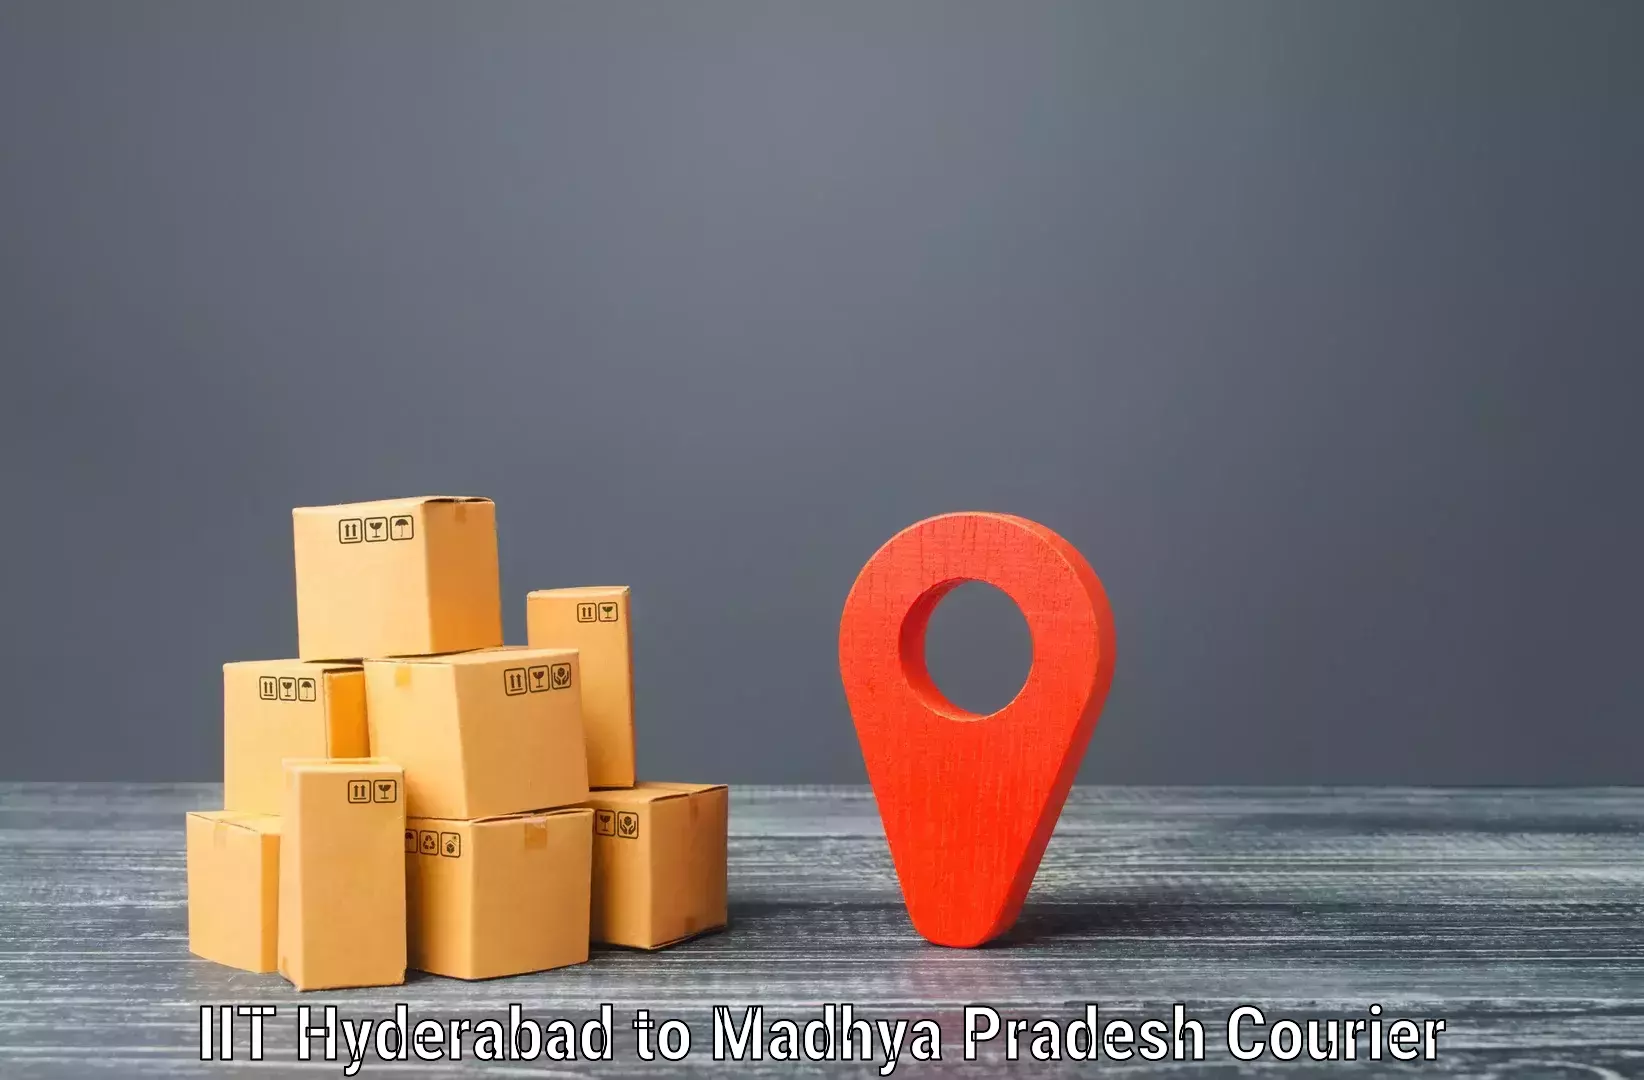 Courier service booking IIT Hyderabad to Singrauli